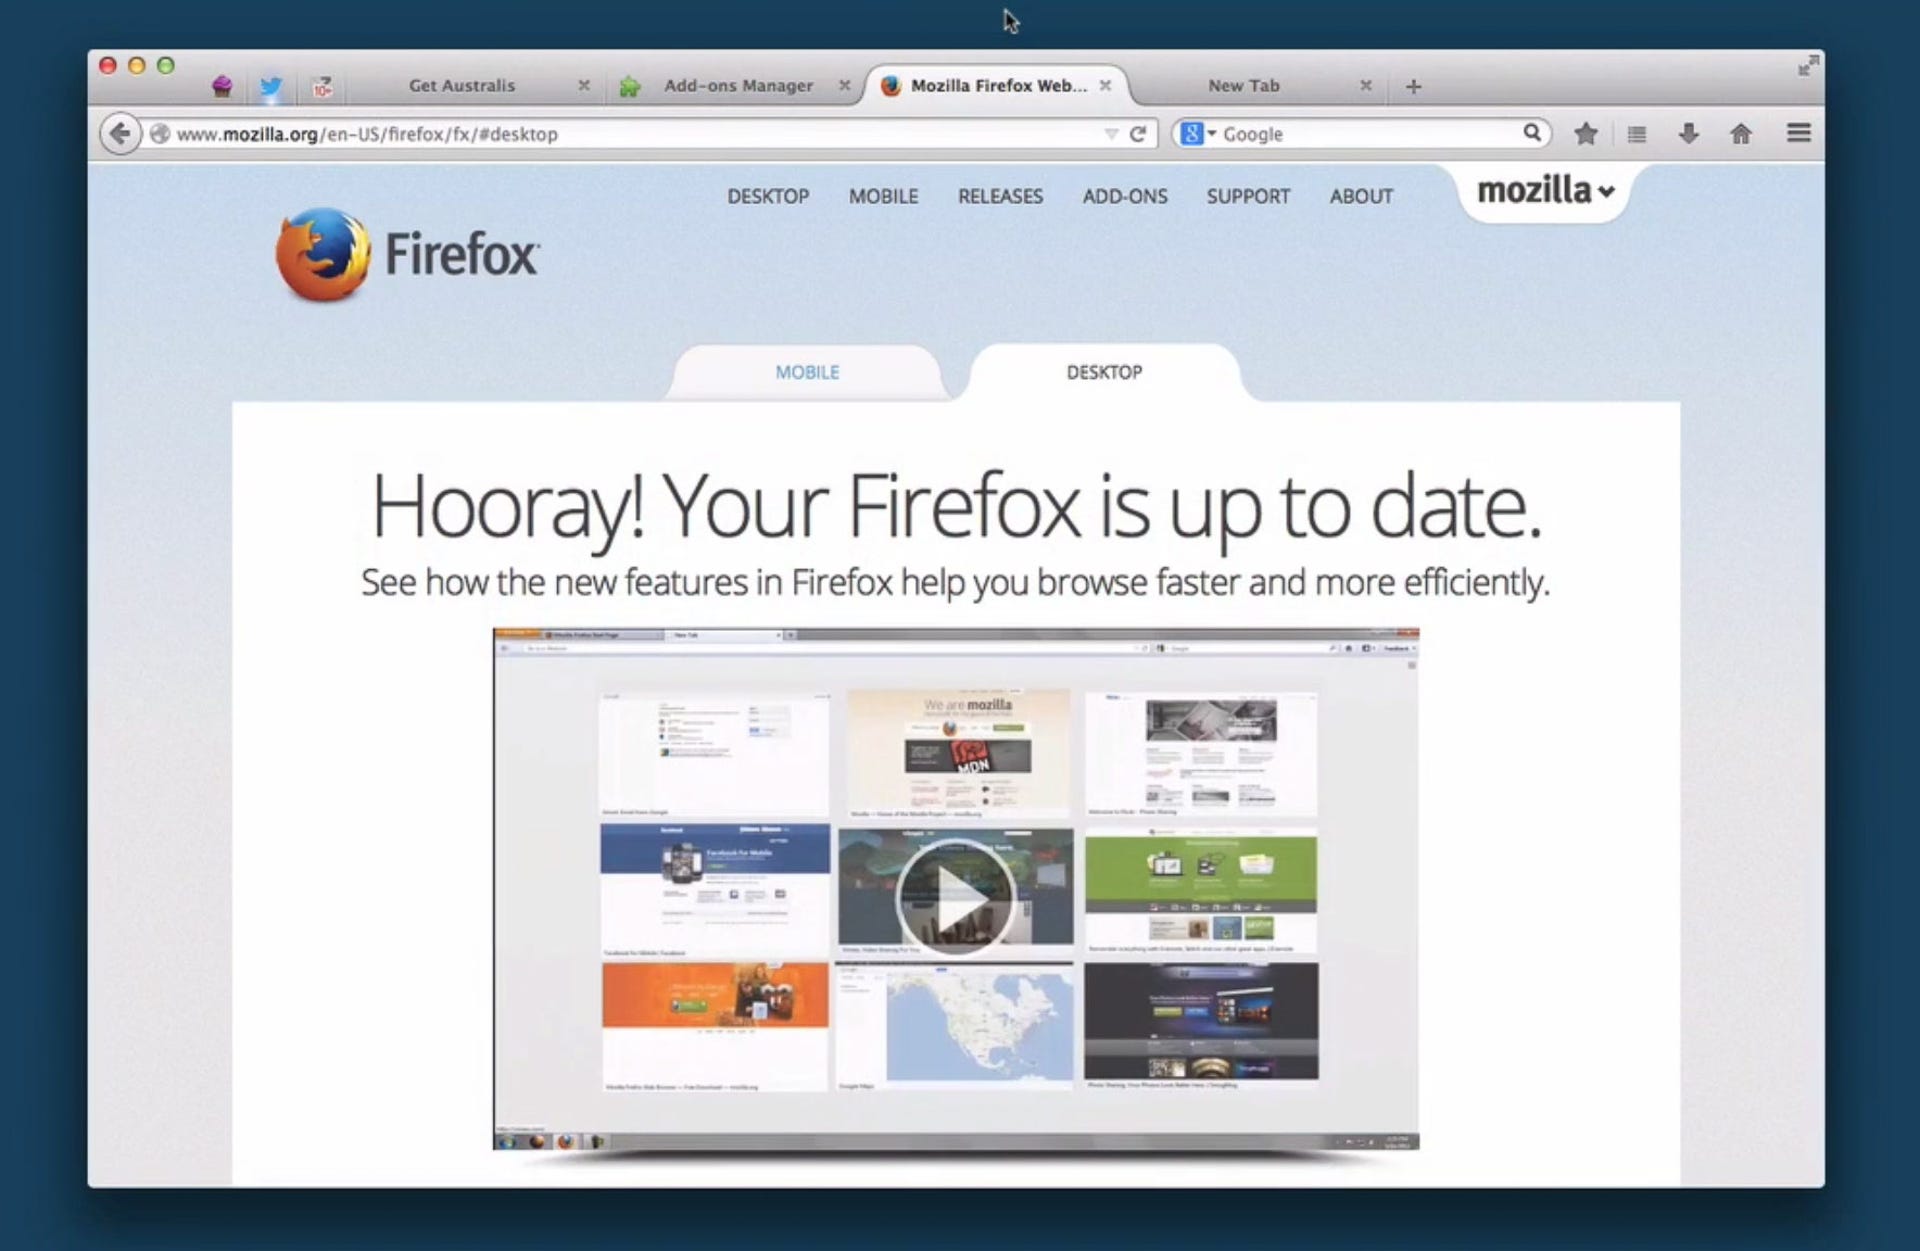 Firefox's former Australis interface featured a curvy tab, too